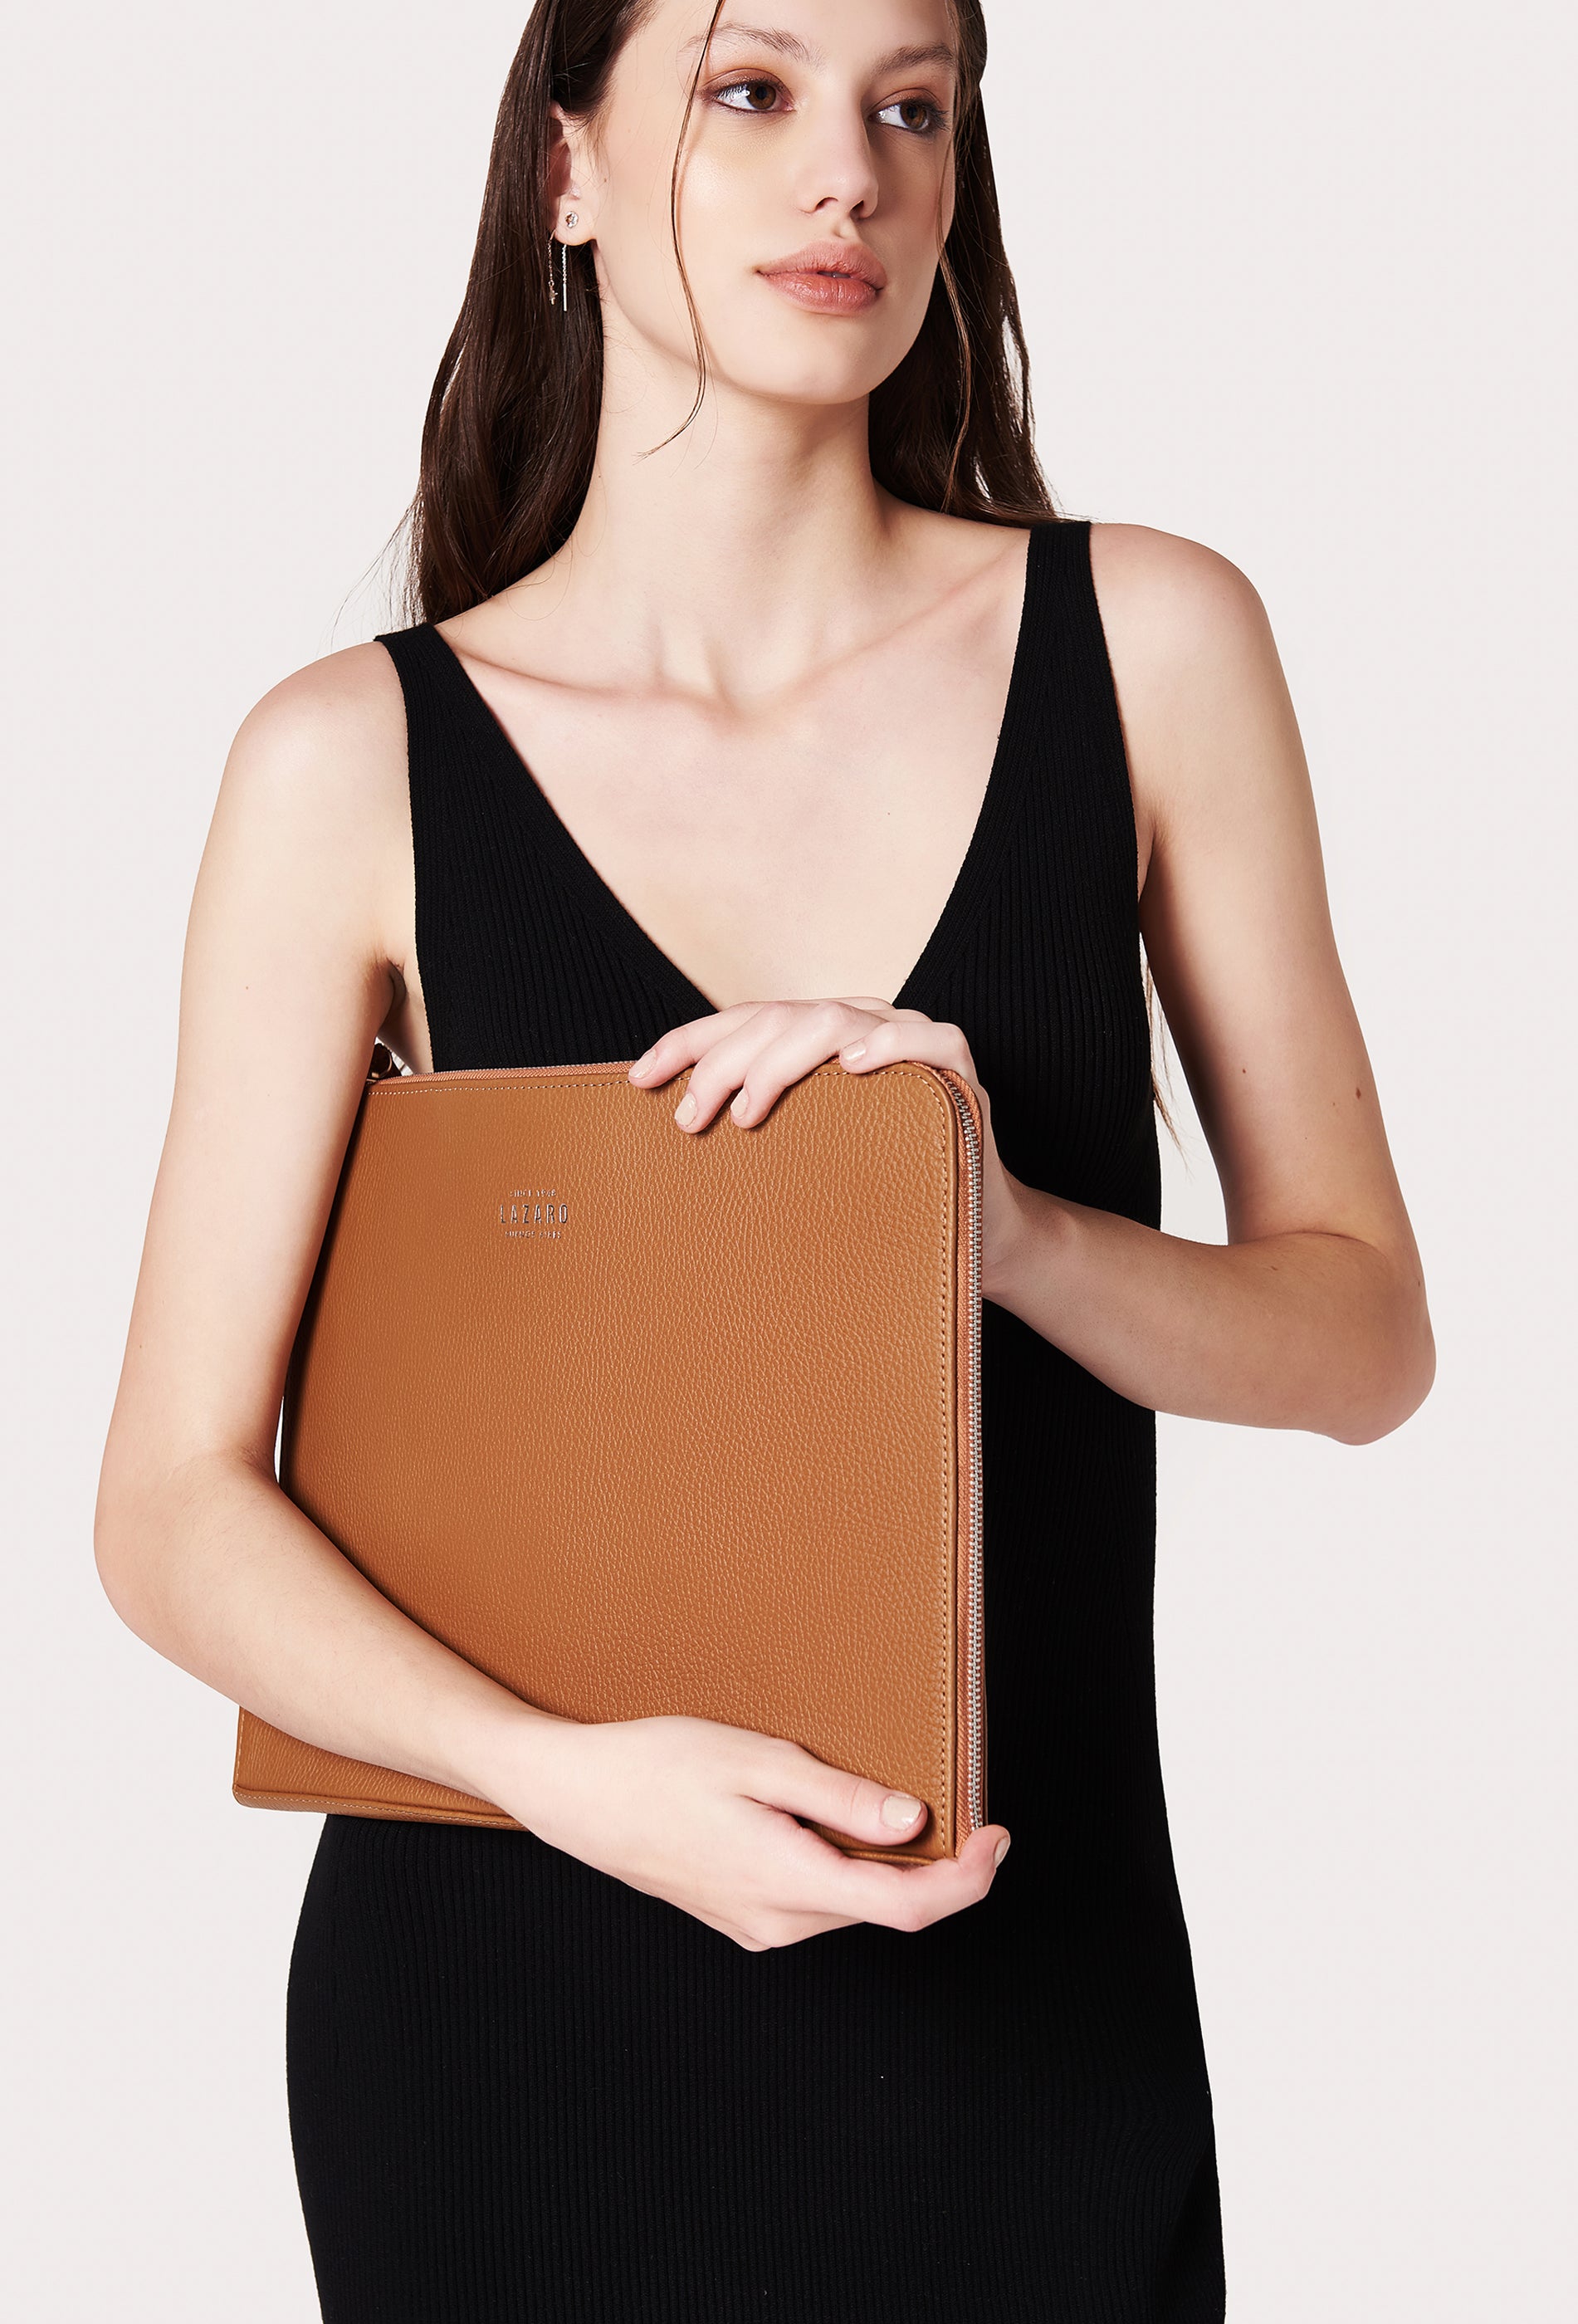 A model carries a sophisticated tan leather slim computer case, showcasing its sophisticated design. The bag features internal pockets and compartments, adding to its elegant appeal. The model confidently displays the bag's size and craftsmanship while exuding a sense of style and elegance.